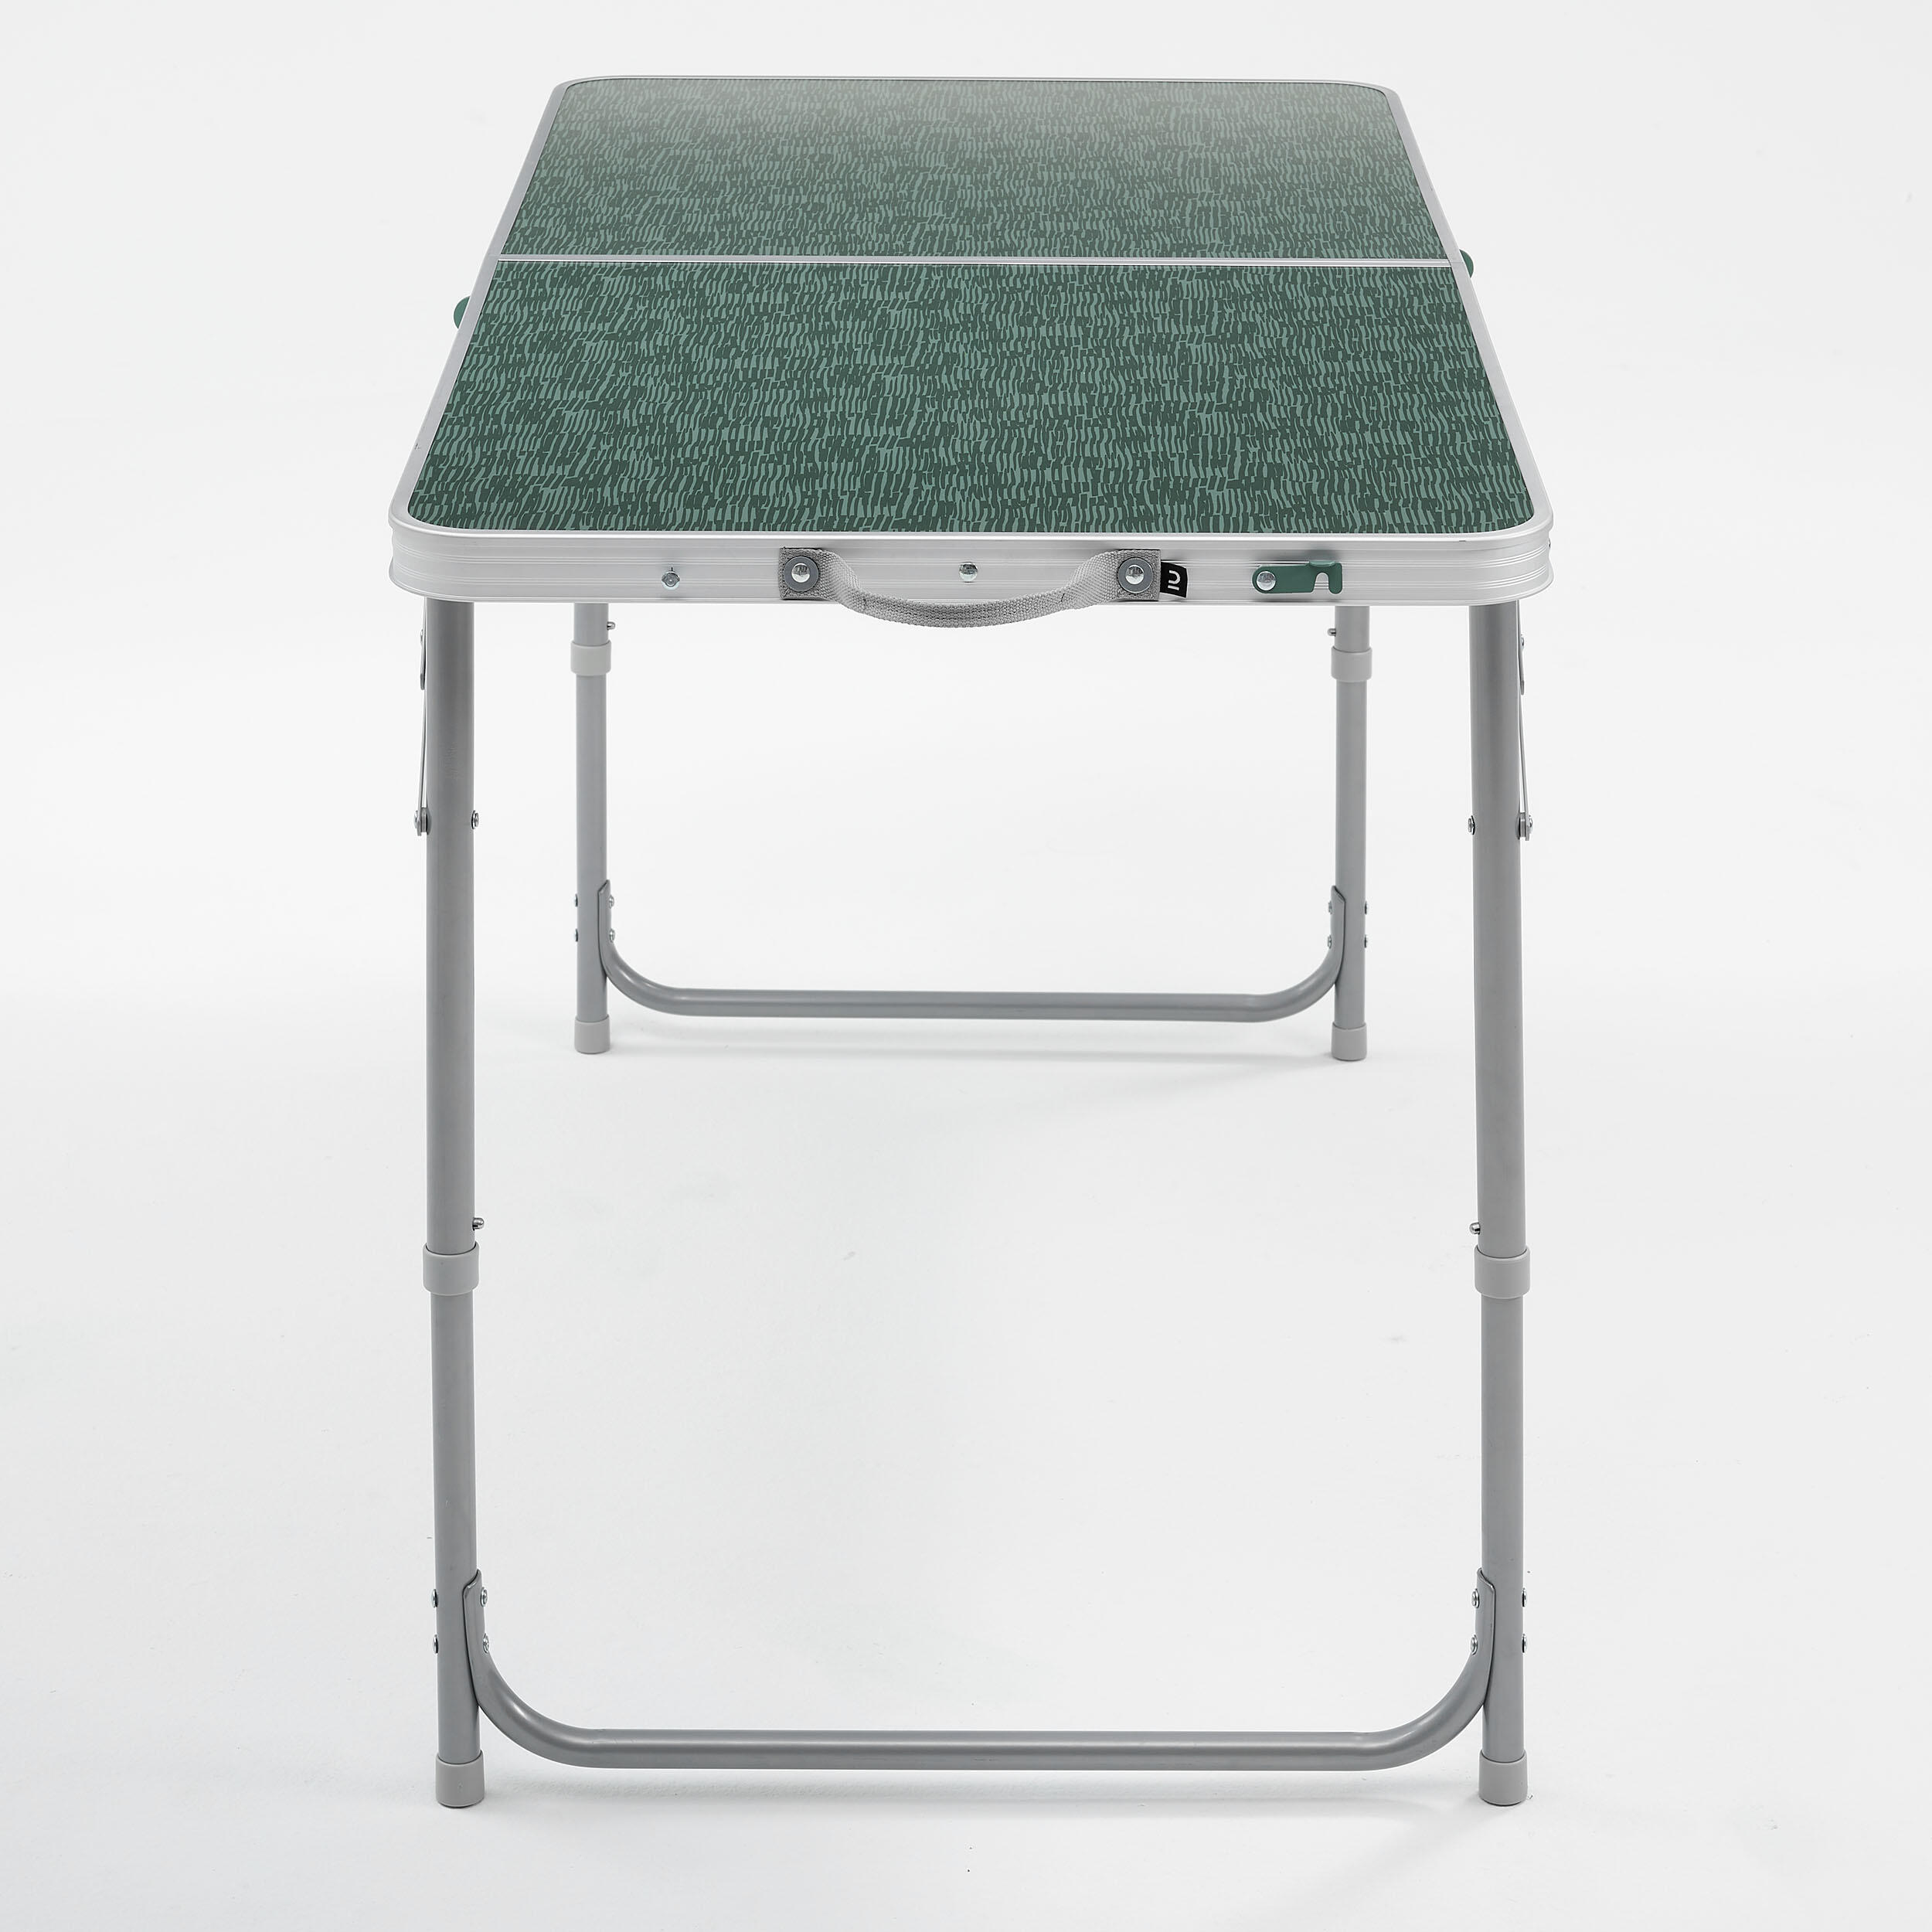 FOLDING CAMPING TABLE - 4 TO 6 PEOPLE 7/12